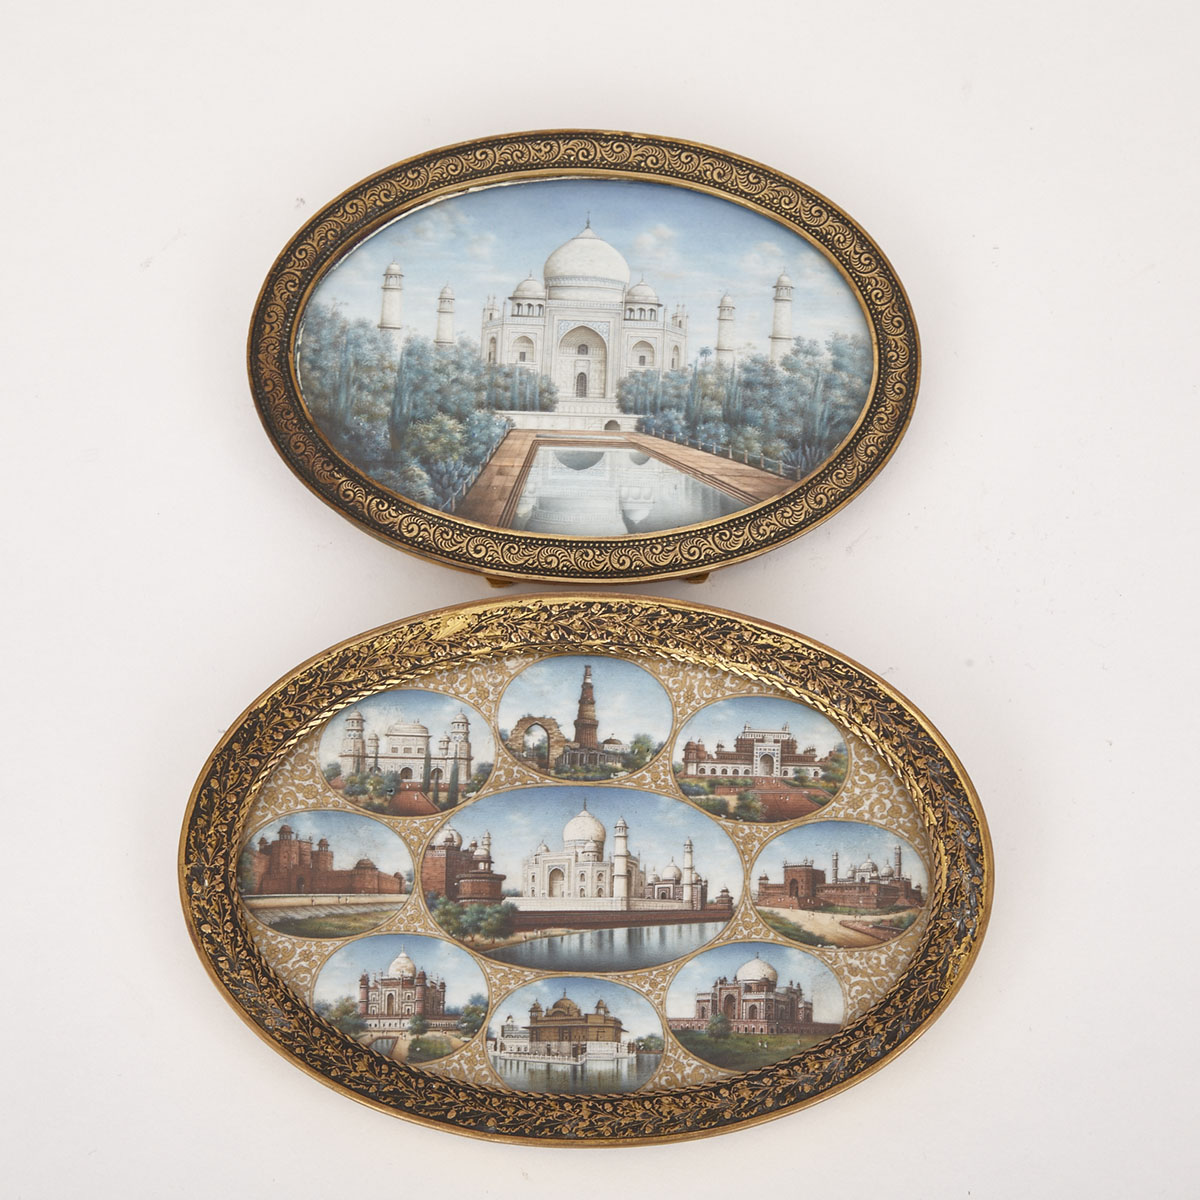 Two Indian Company School Ovals, The Taj Mahal, and The Taj Mahal and other Landmarks, 19th century